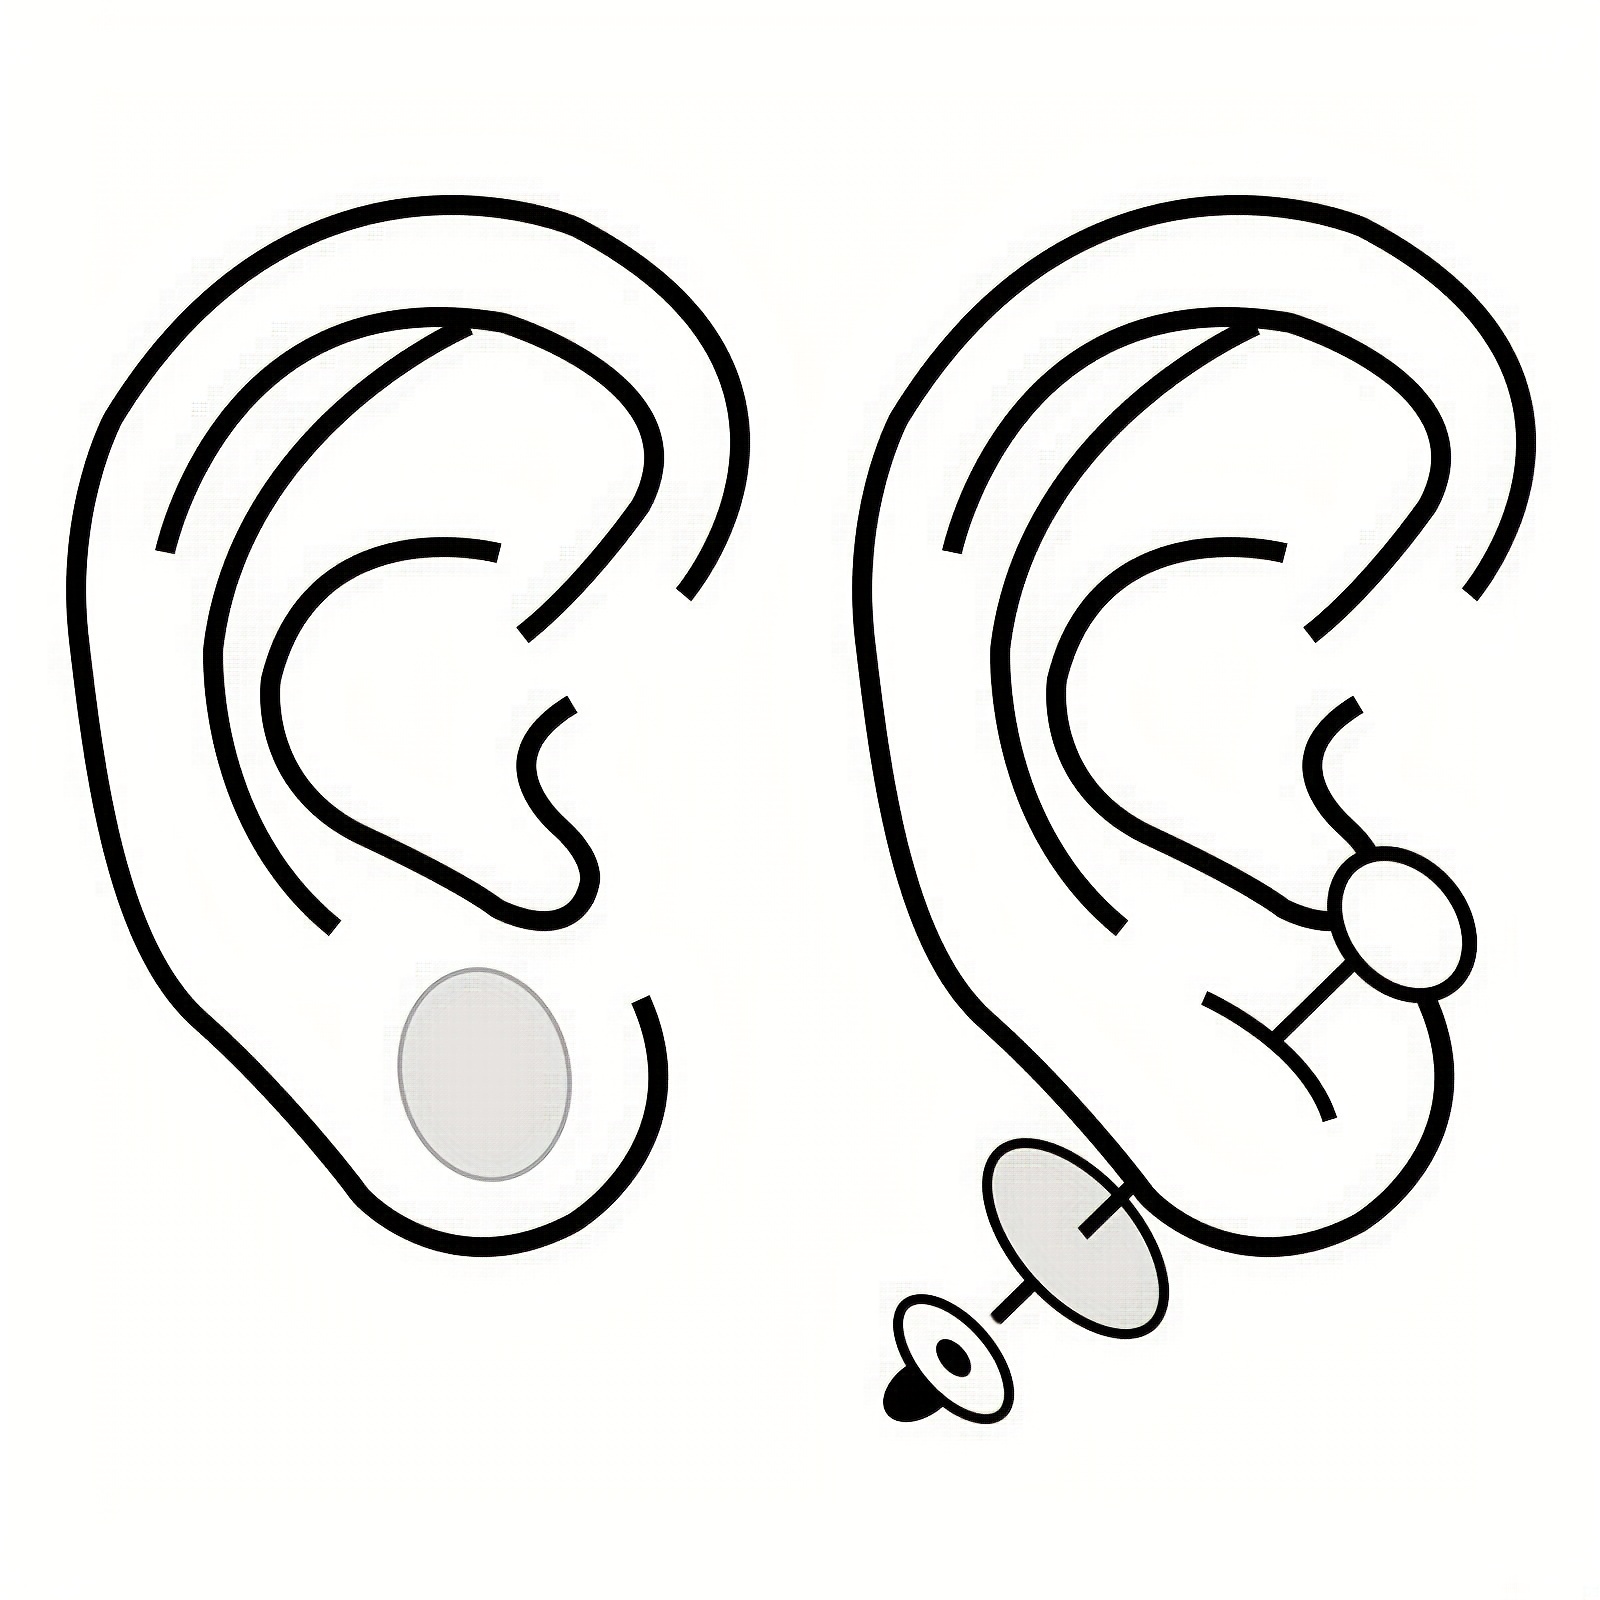 Ear Lobe Support Patches for Earrings, Earring Stickers for Heavy Earrings, Earring Support Patches Large Earrings to Prevent Long Ear Stretch and